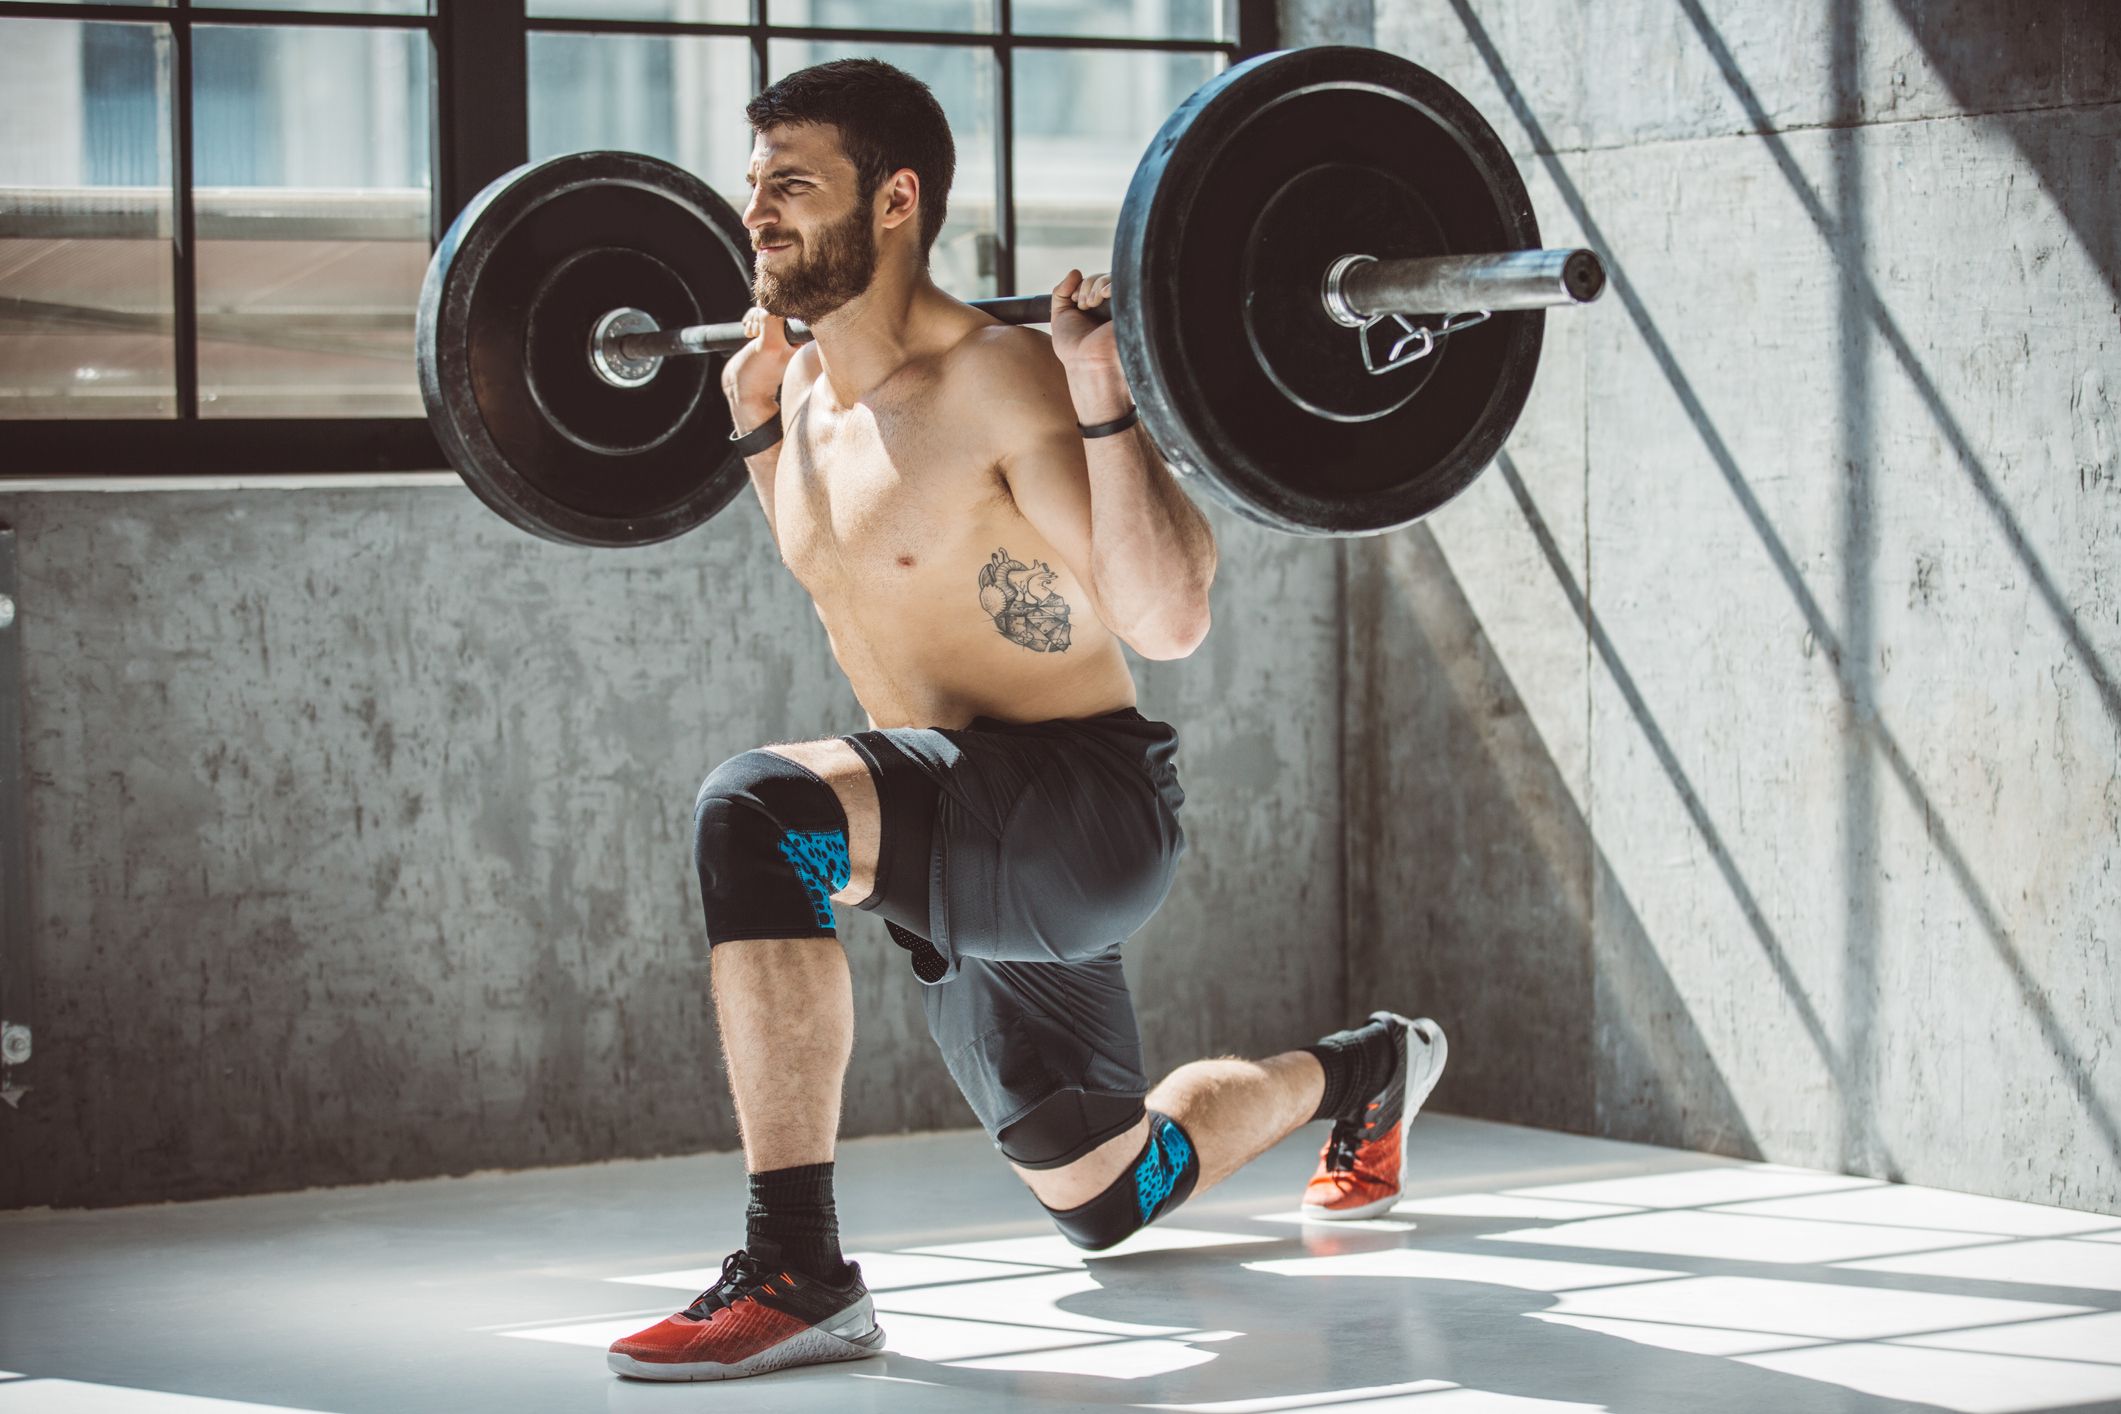 Athlean-X Shares 5 Leg Day Workout Tips for More Lower Body Gains